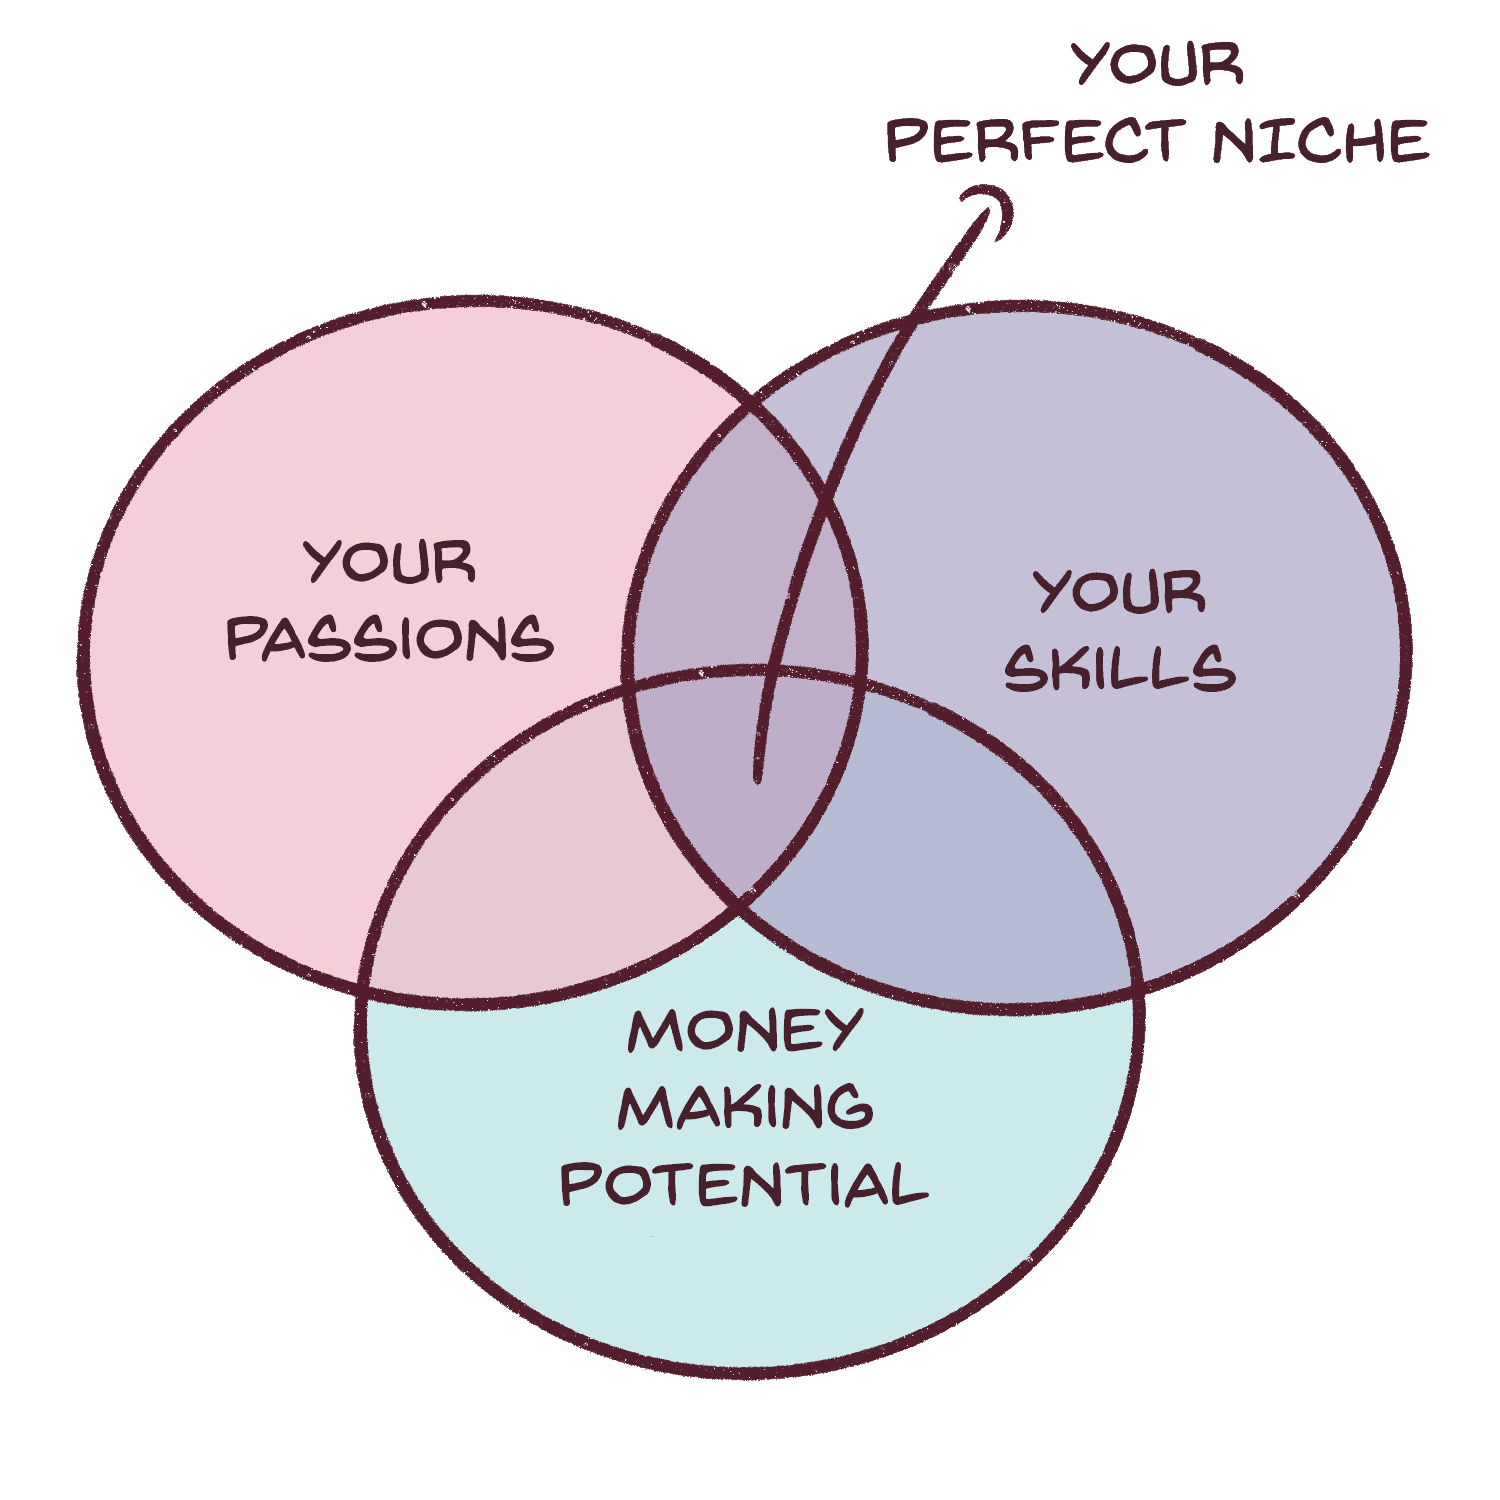 how do you choose a profitable blogging niche? This profitable blog niche venn diagram will help you understand how to choose the perfect blog niche for you.